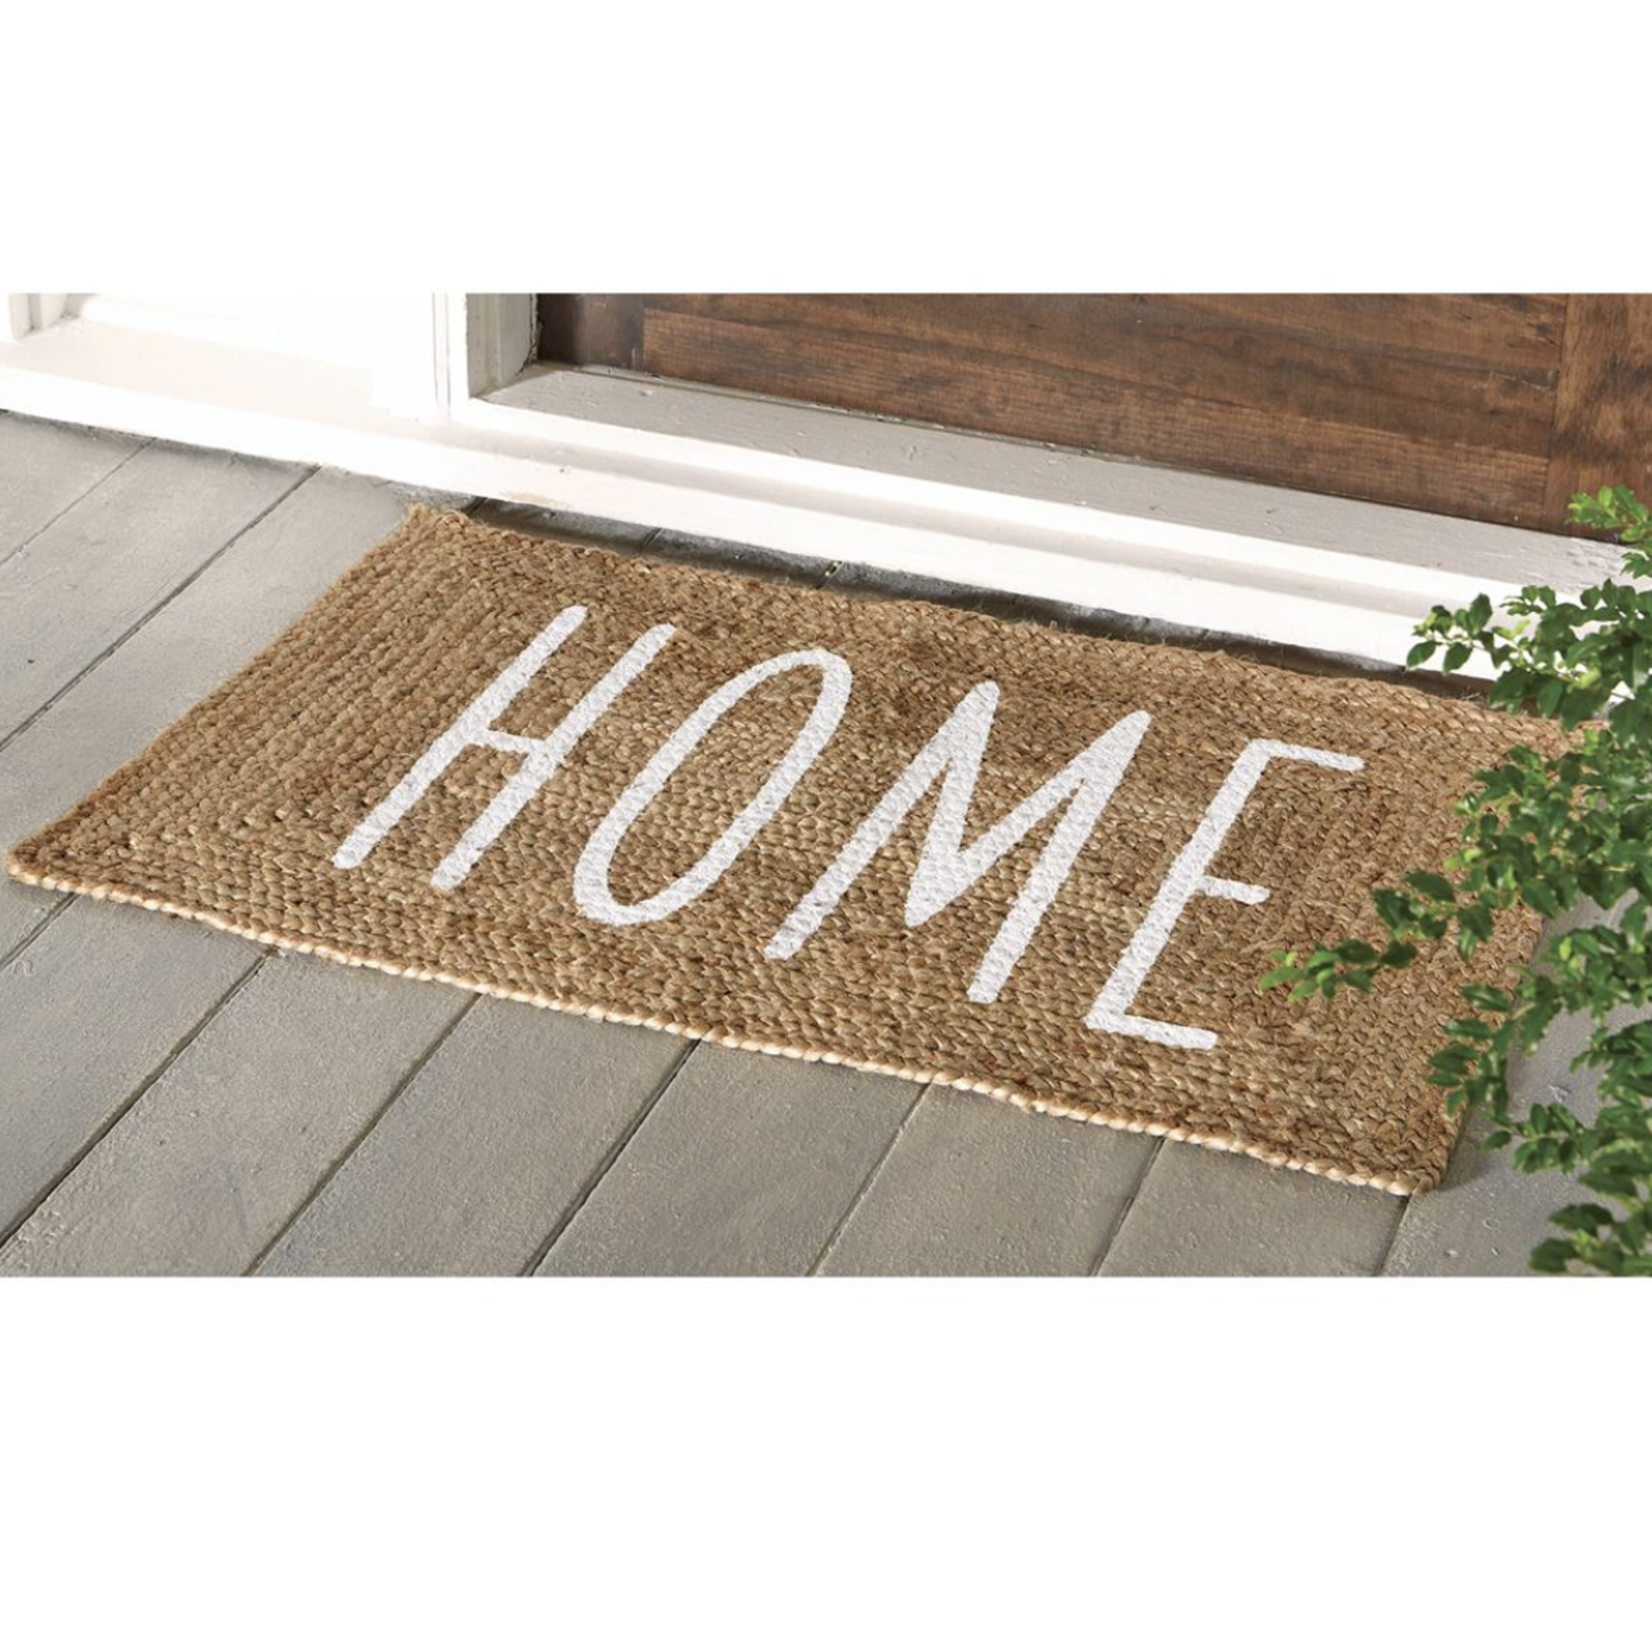 Outside The Box 36x23 "Home" Braided Jute Doormat